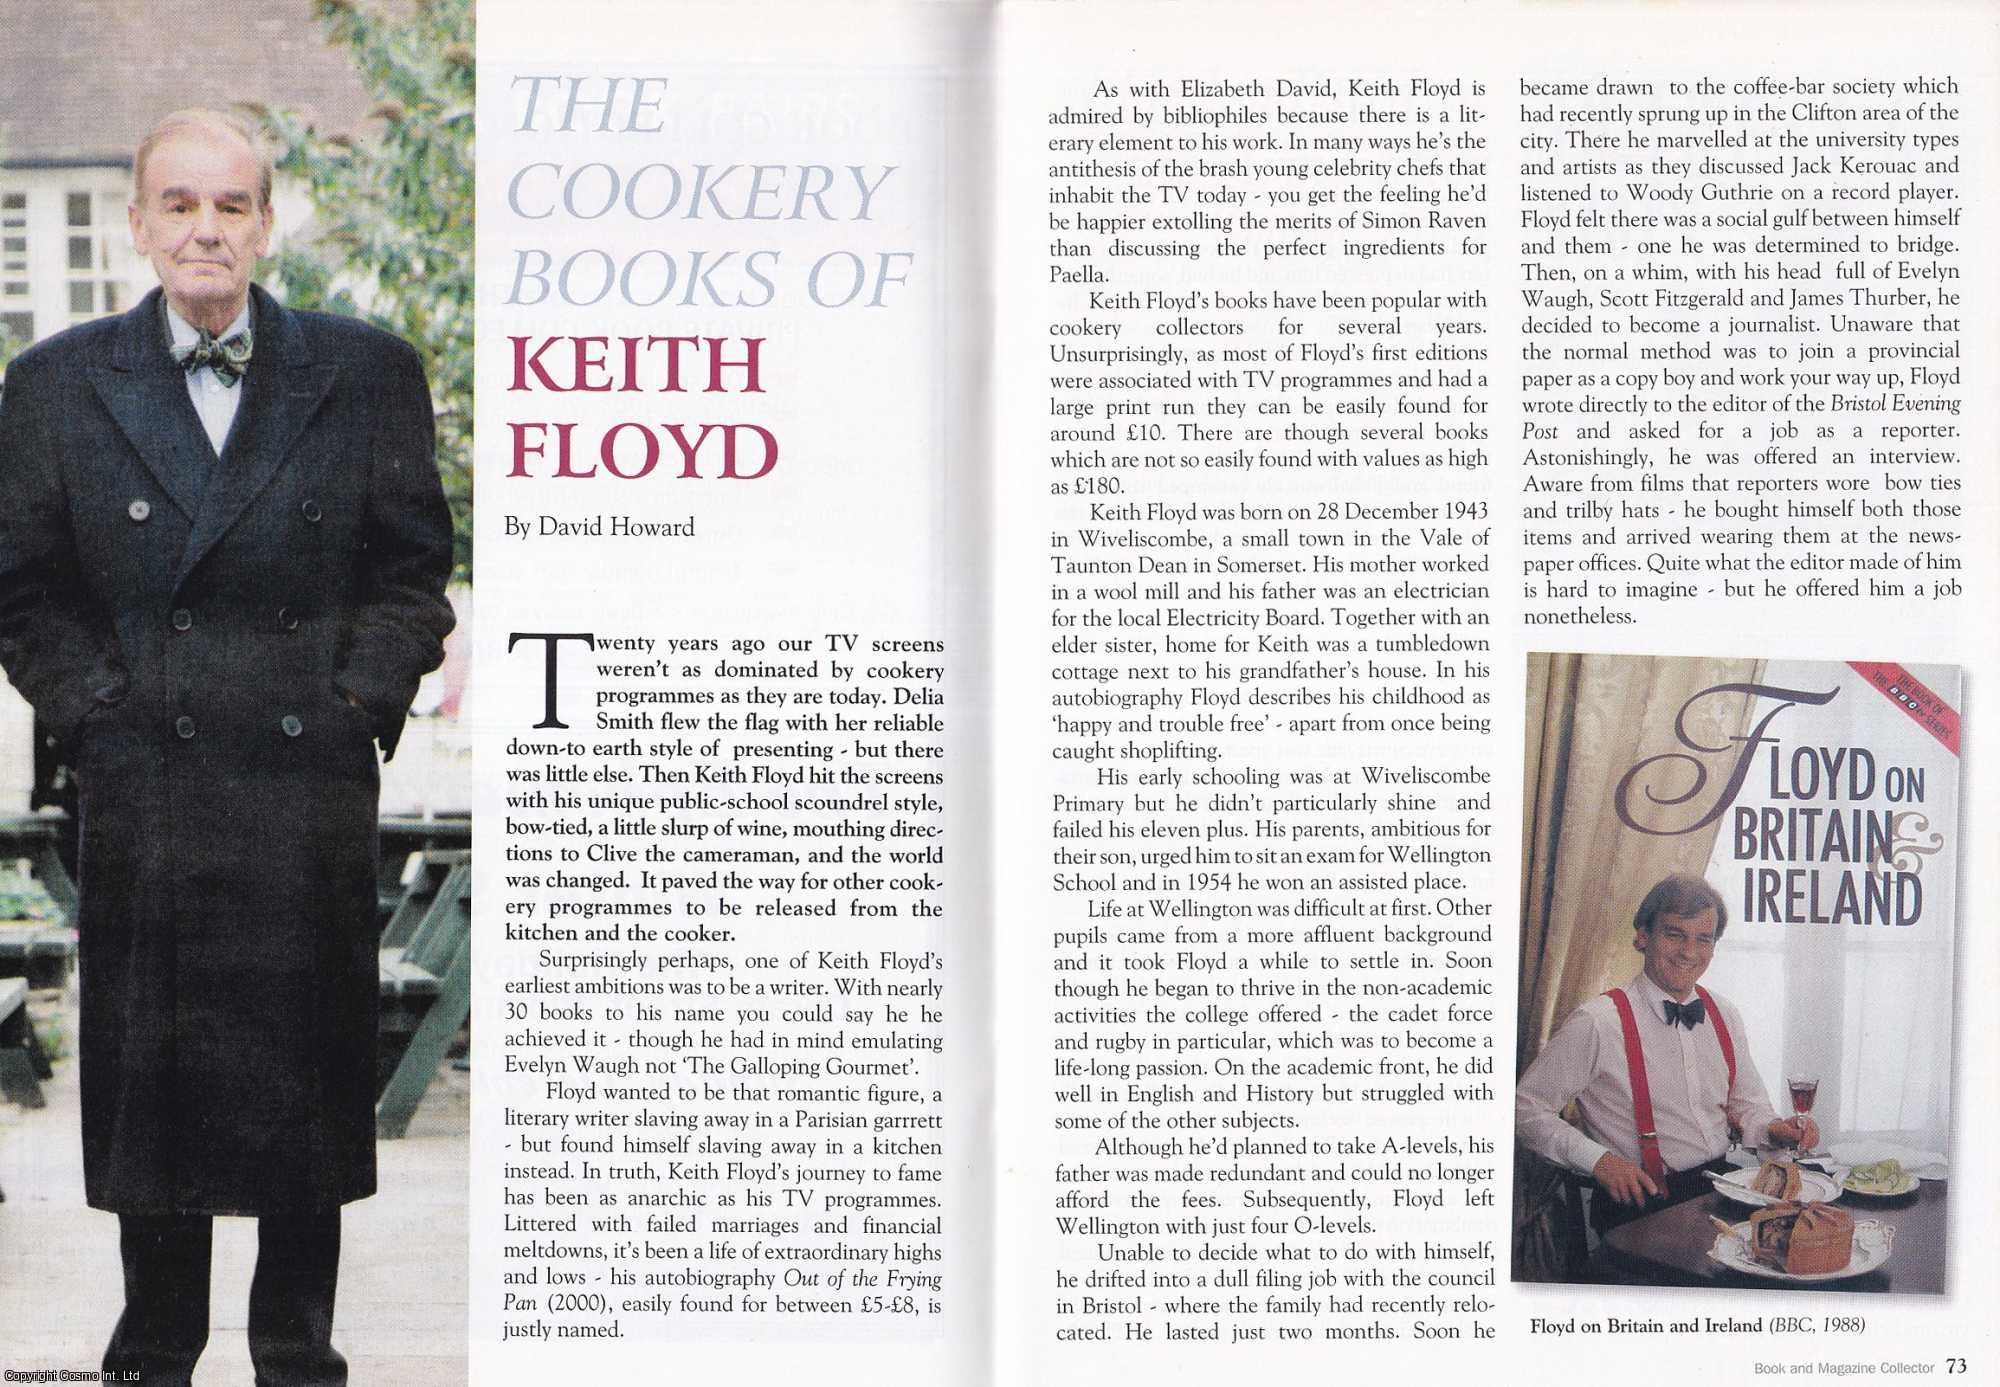 David Howard - The Cookery Books of Keith Floyd. This is an original article separated from an issue of The Book & Magazine Collector publication, 2007.